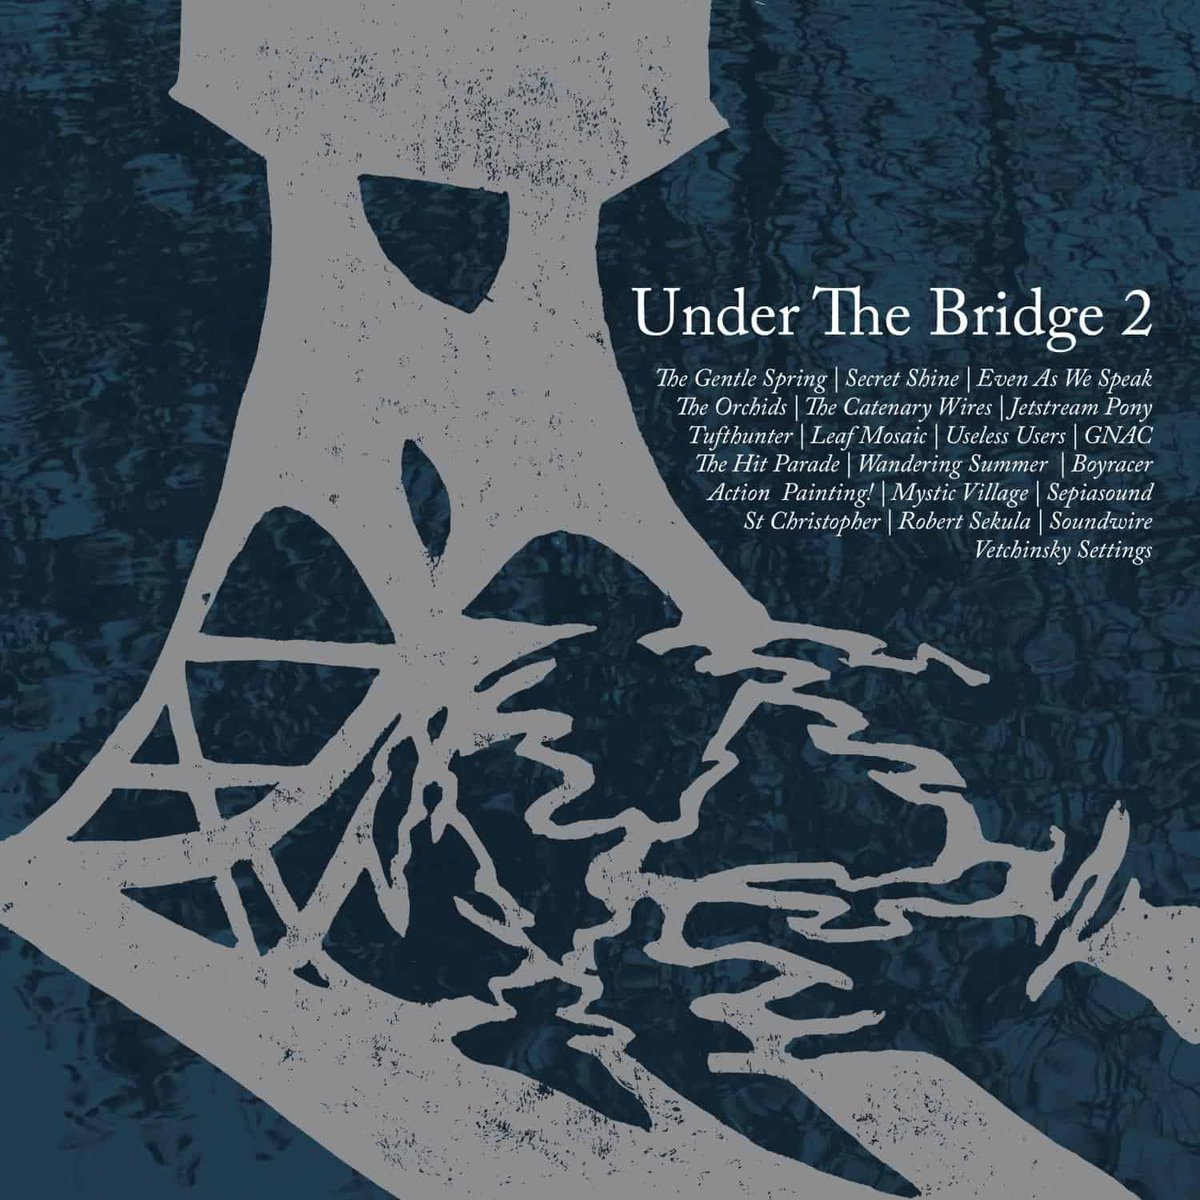 JUST IN! 'Under The Bridge 2' by Various Skep Wax dig into tracks from artists who released their indie pop tunes through the legendary indie imprint Sarah Records. @SkepWax normanrecords.com/records/201358…